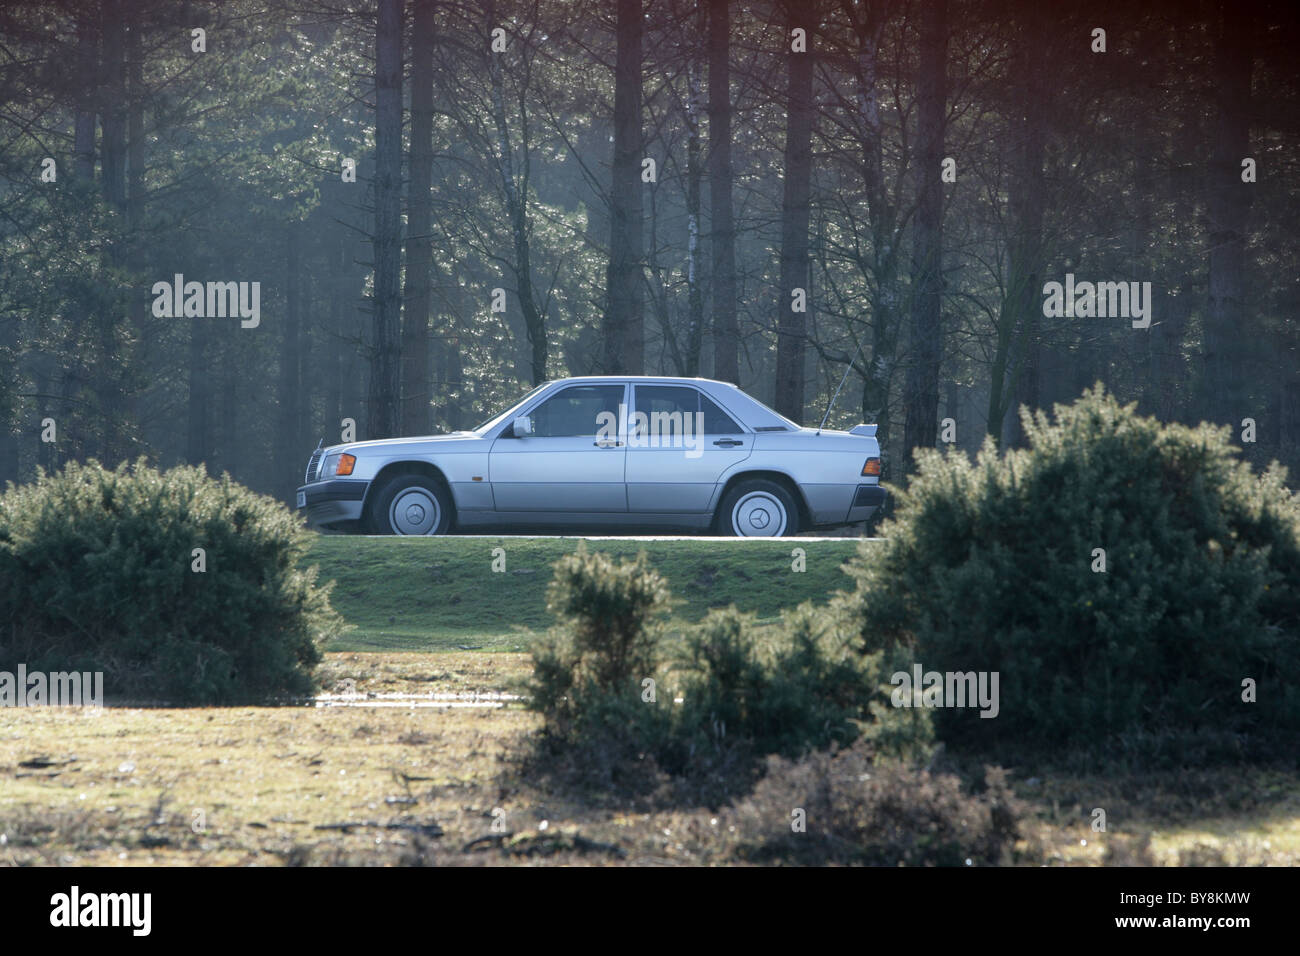 Classic Car 1993 Mercedes Benz 190e pictured in New Forest UK Stock Photo